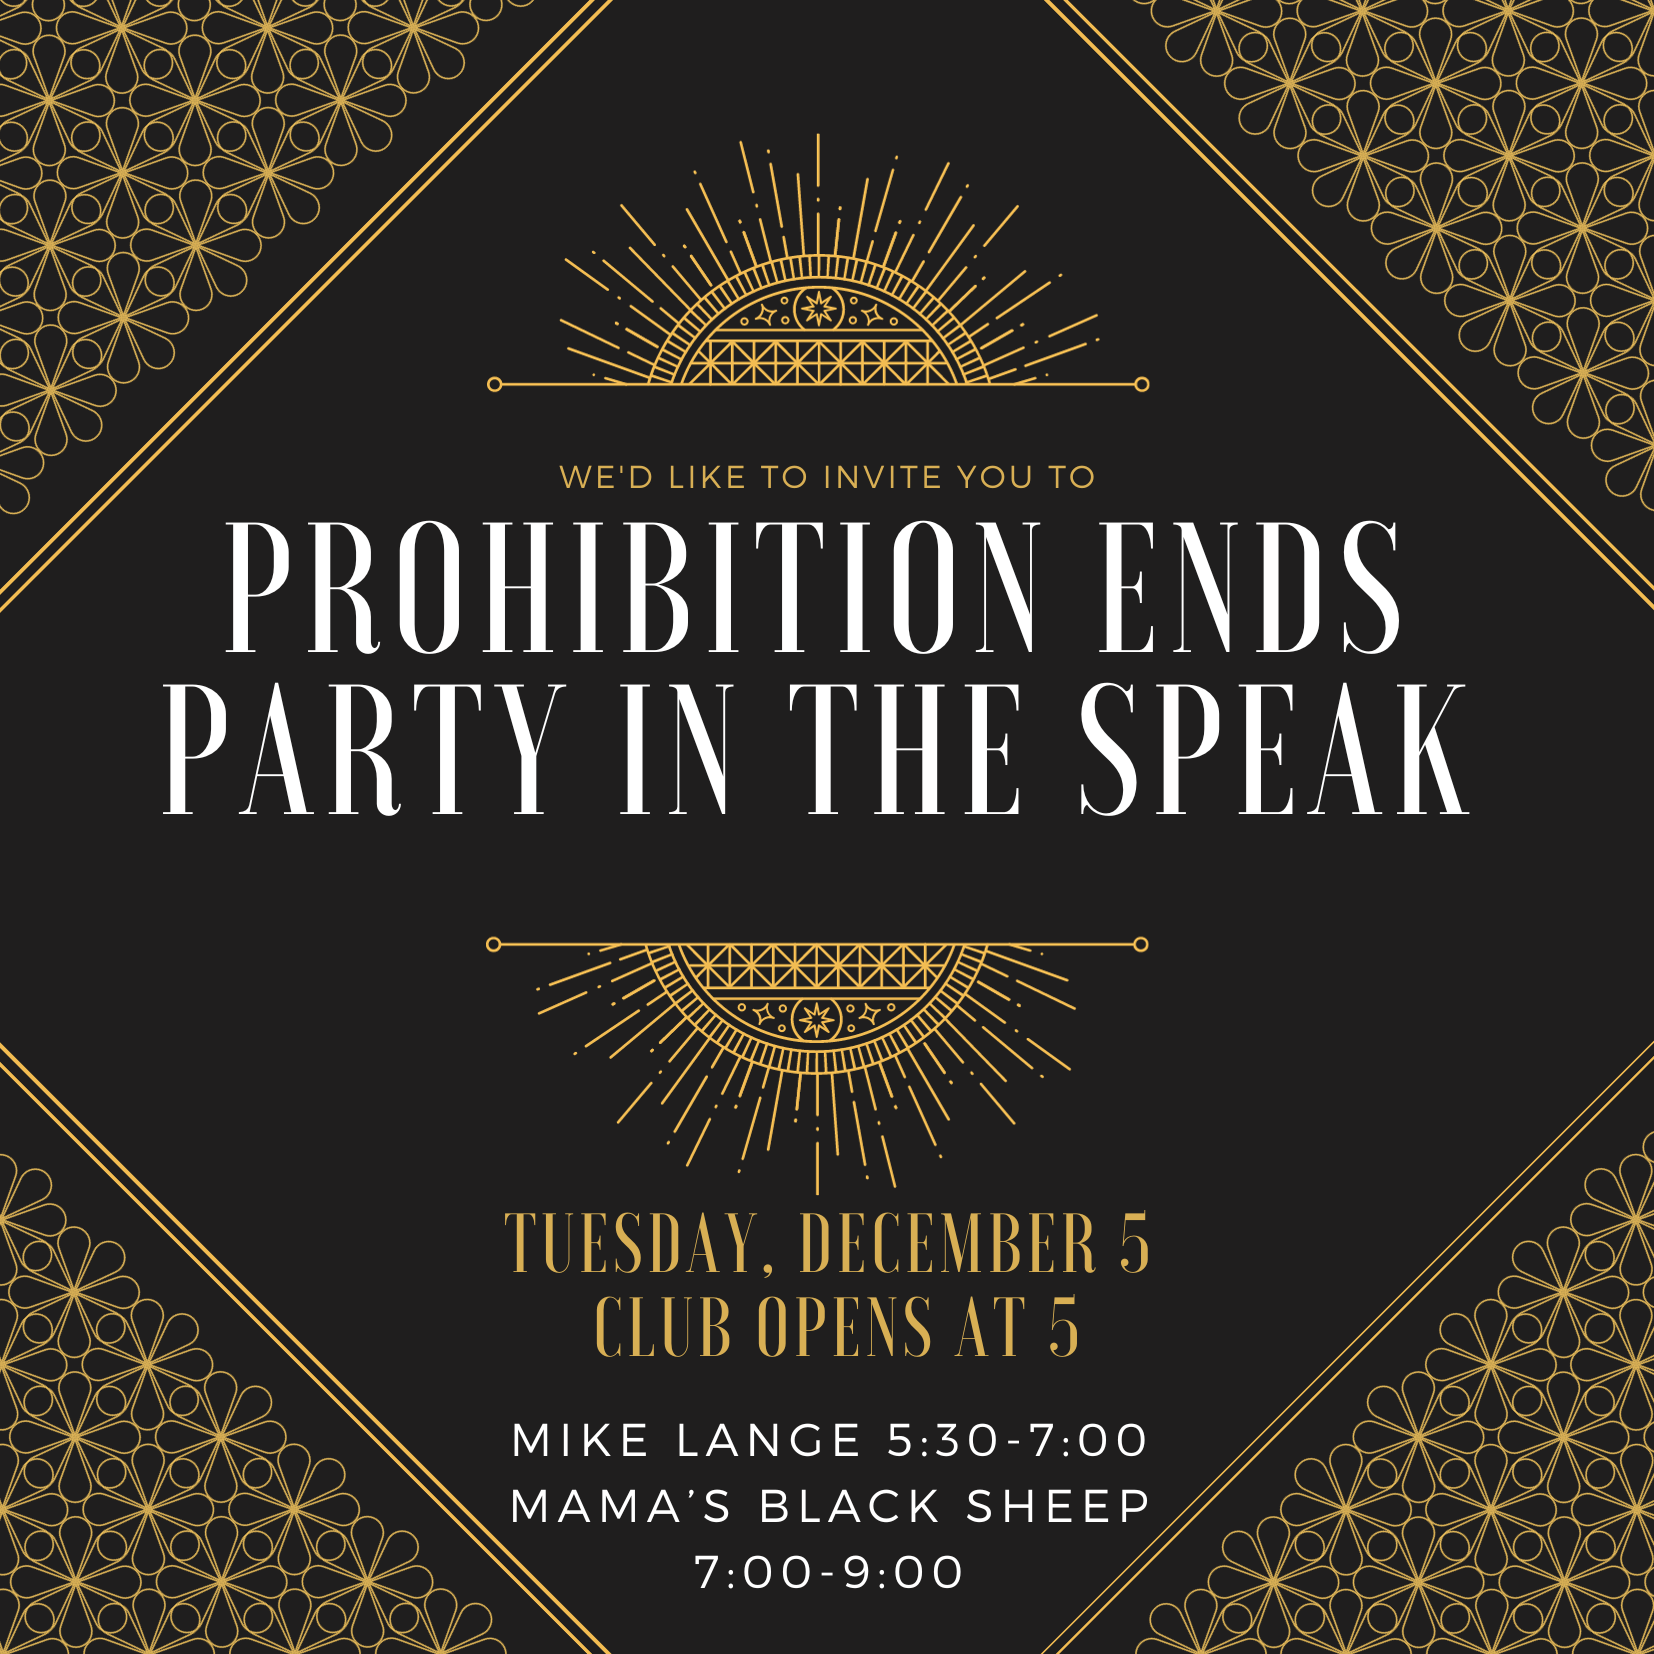 Prohibition Ends Party in the Speak